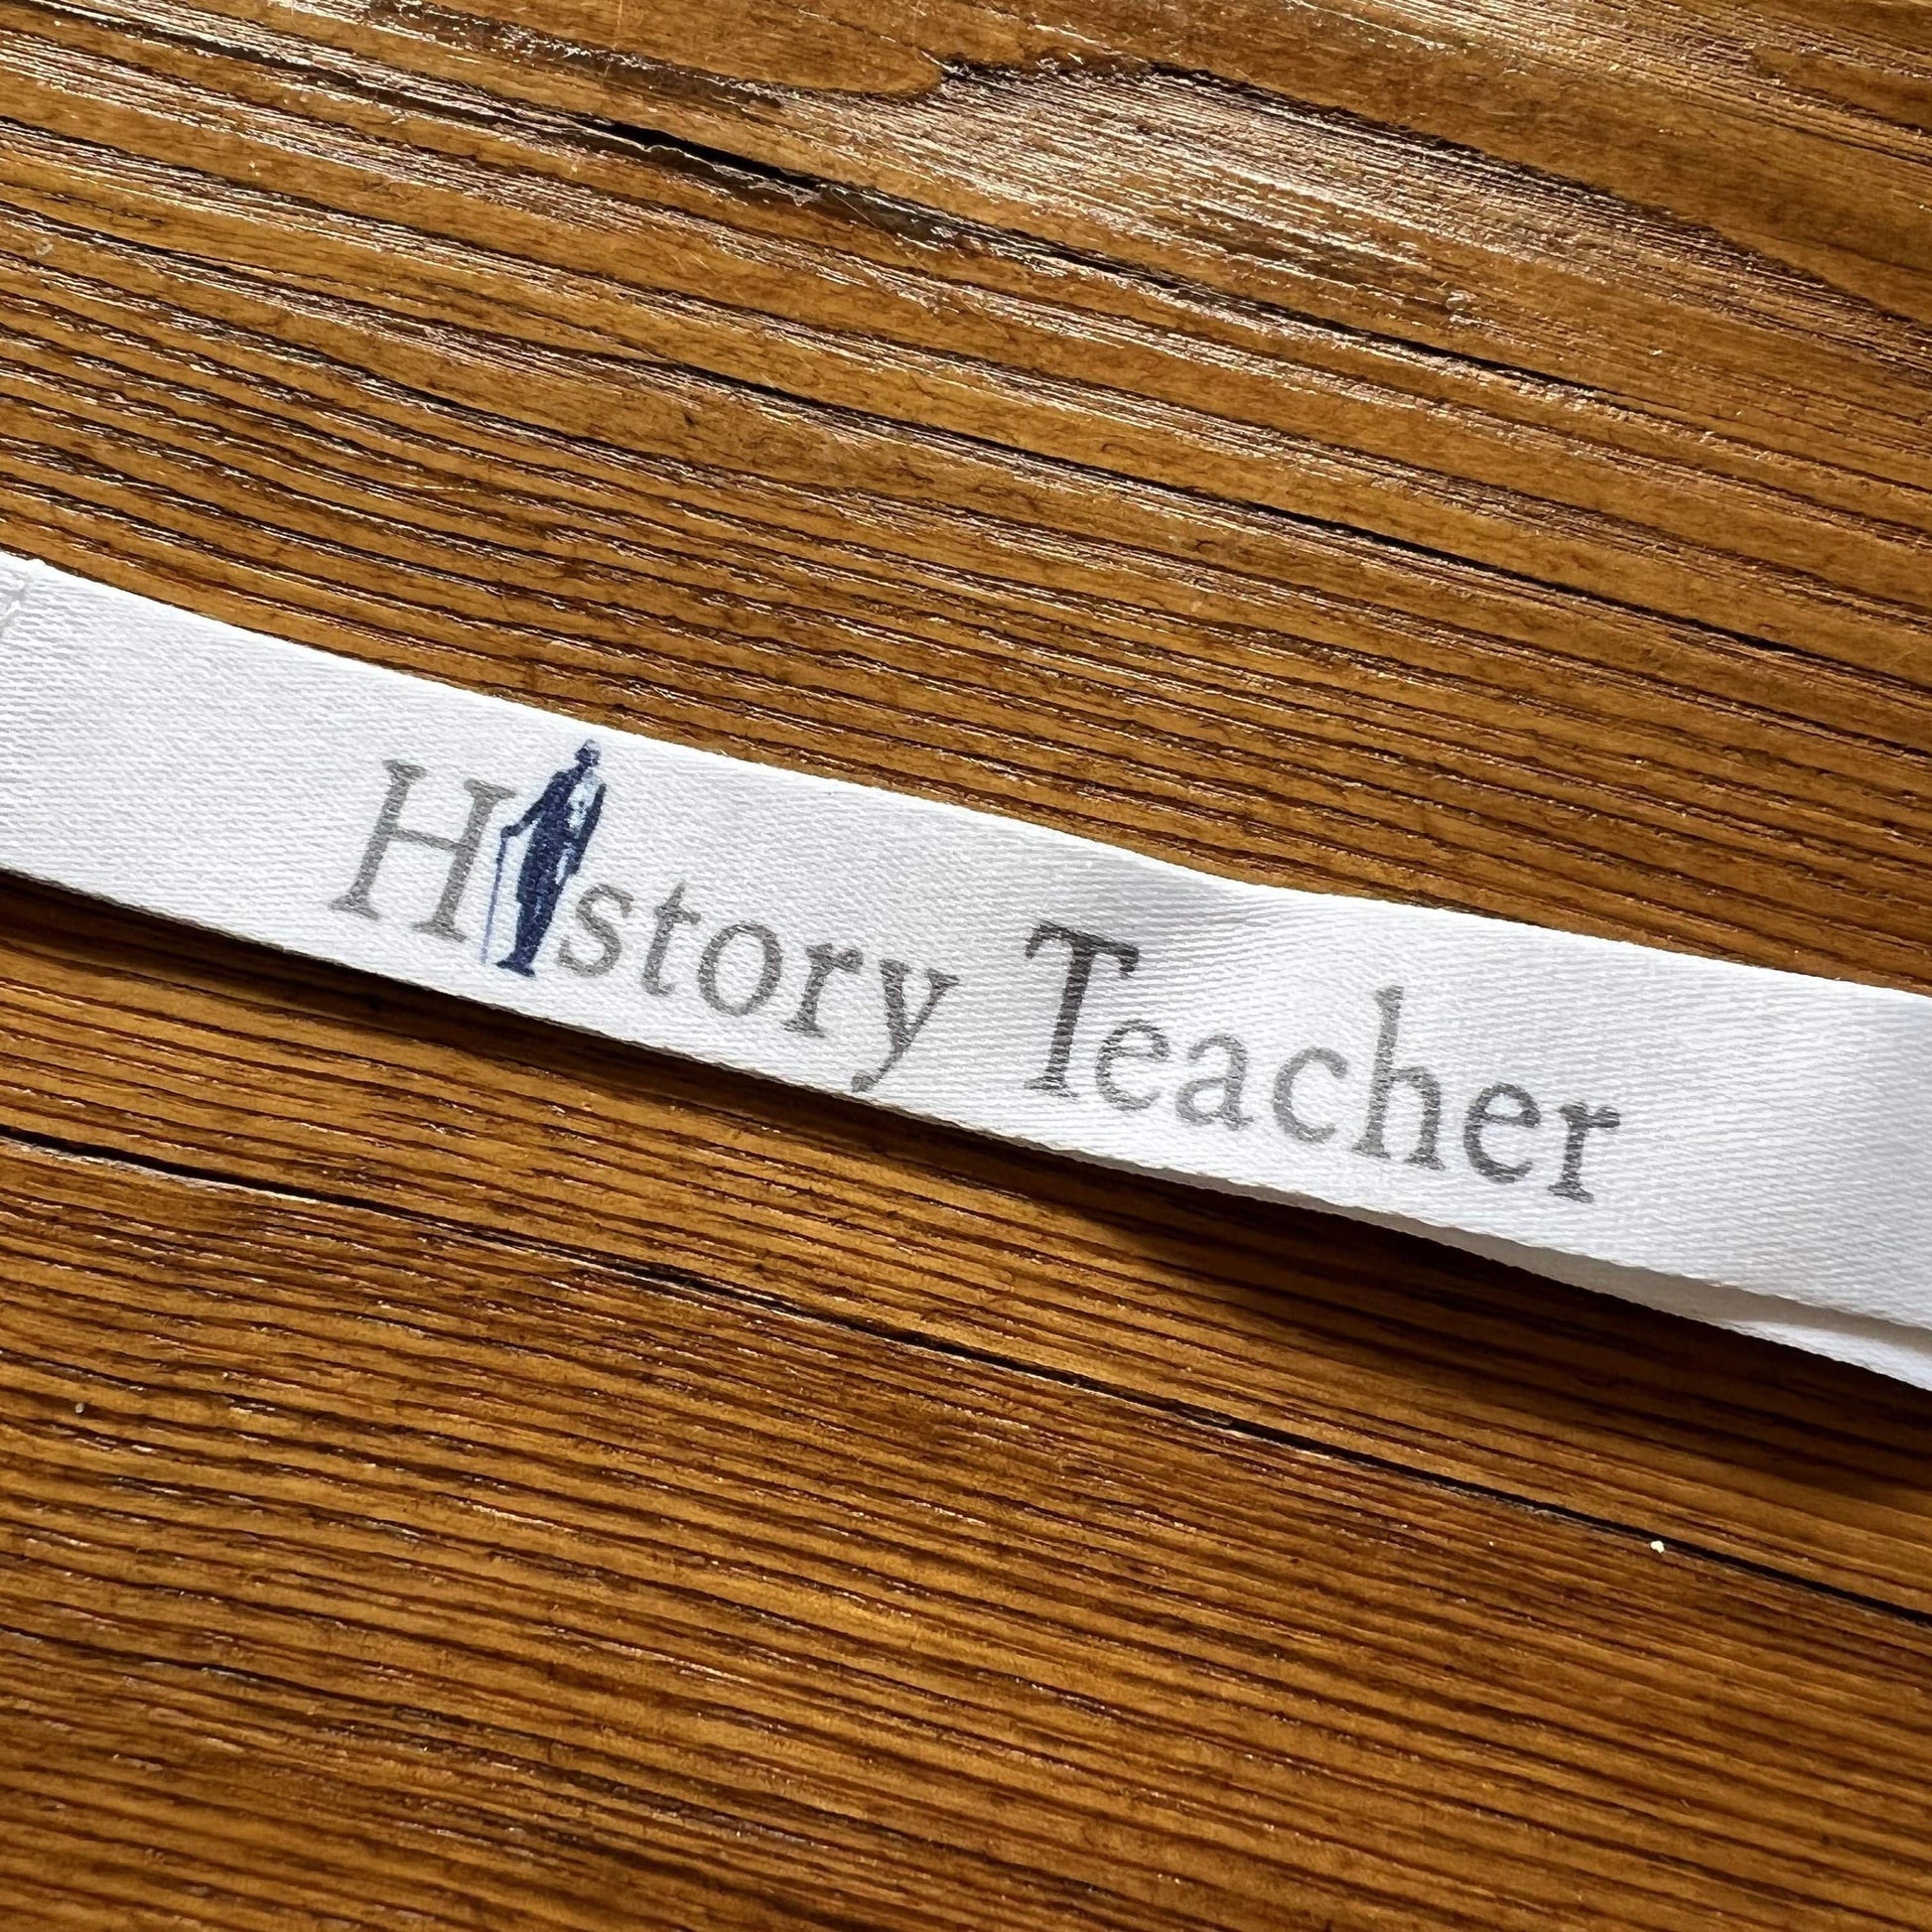 History Teacher Lanyard with George Washington from the History List store